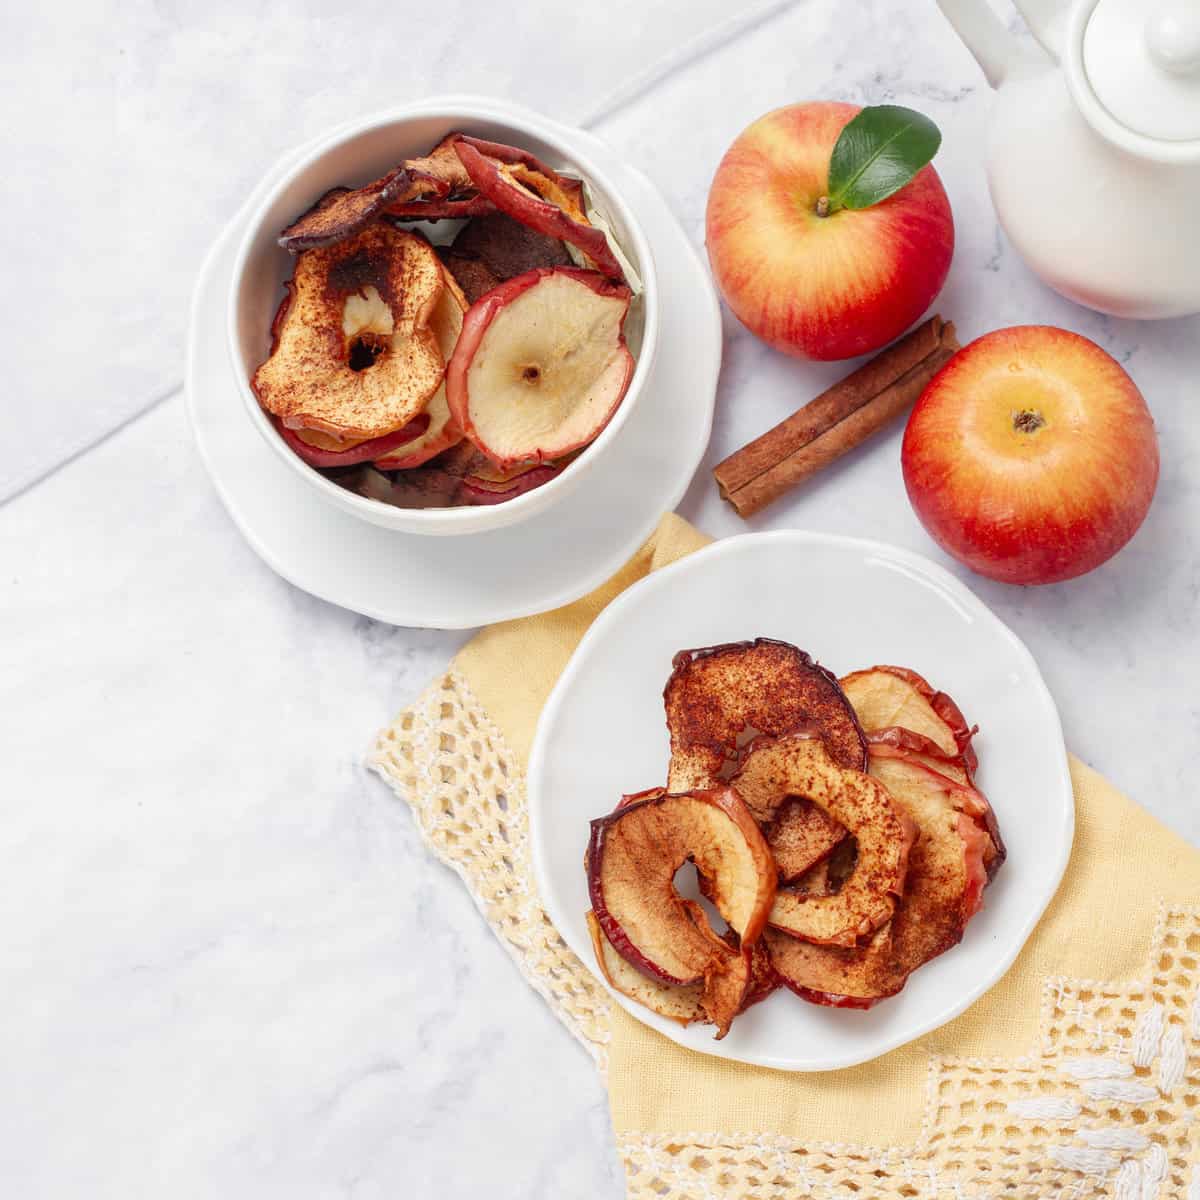 Oven Baked Apple Chips with 2 apples